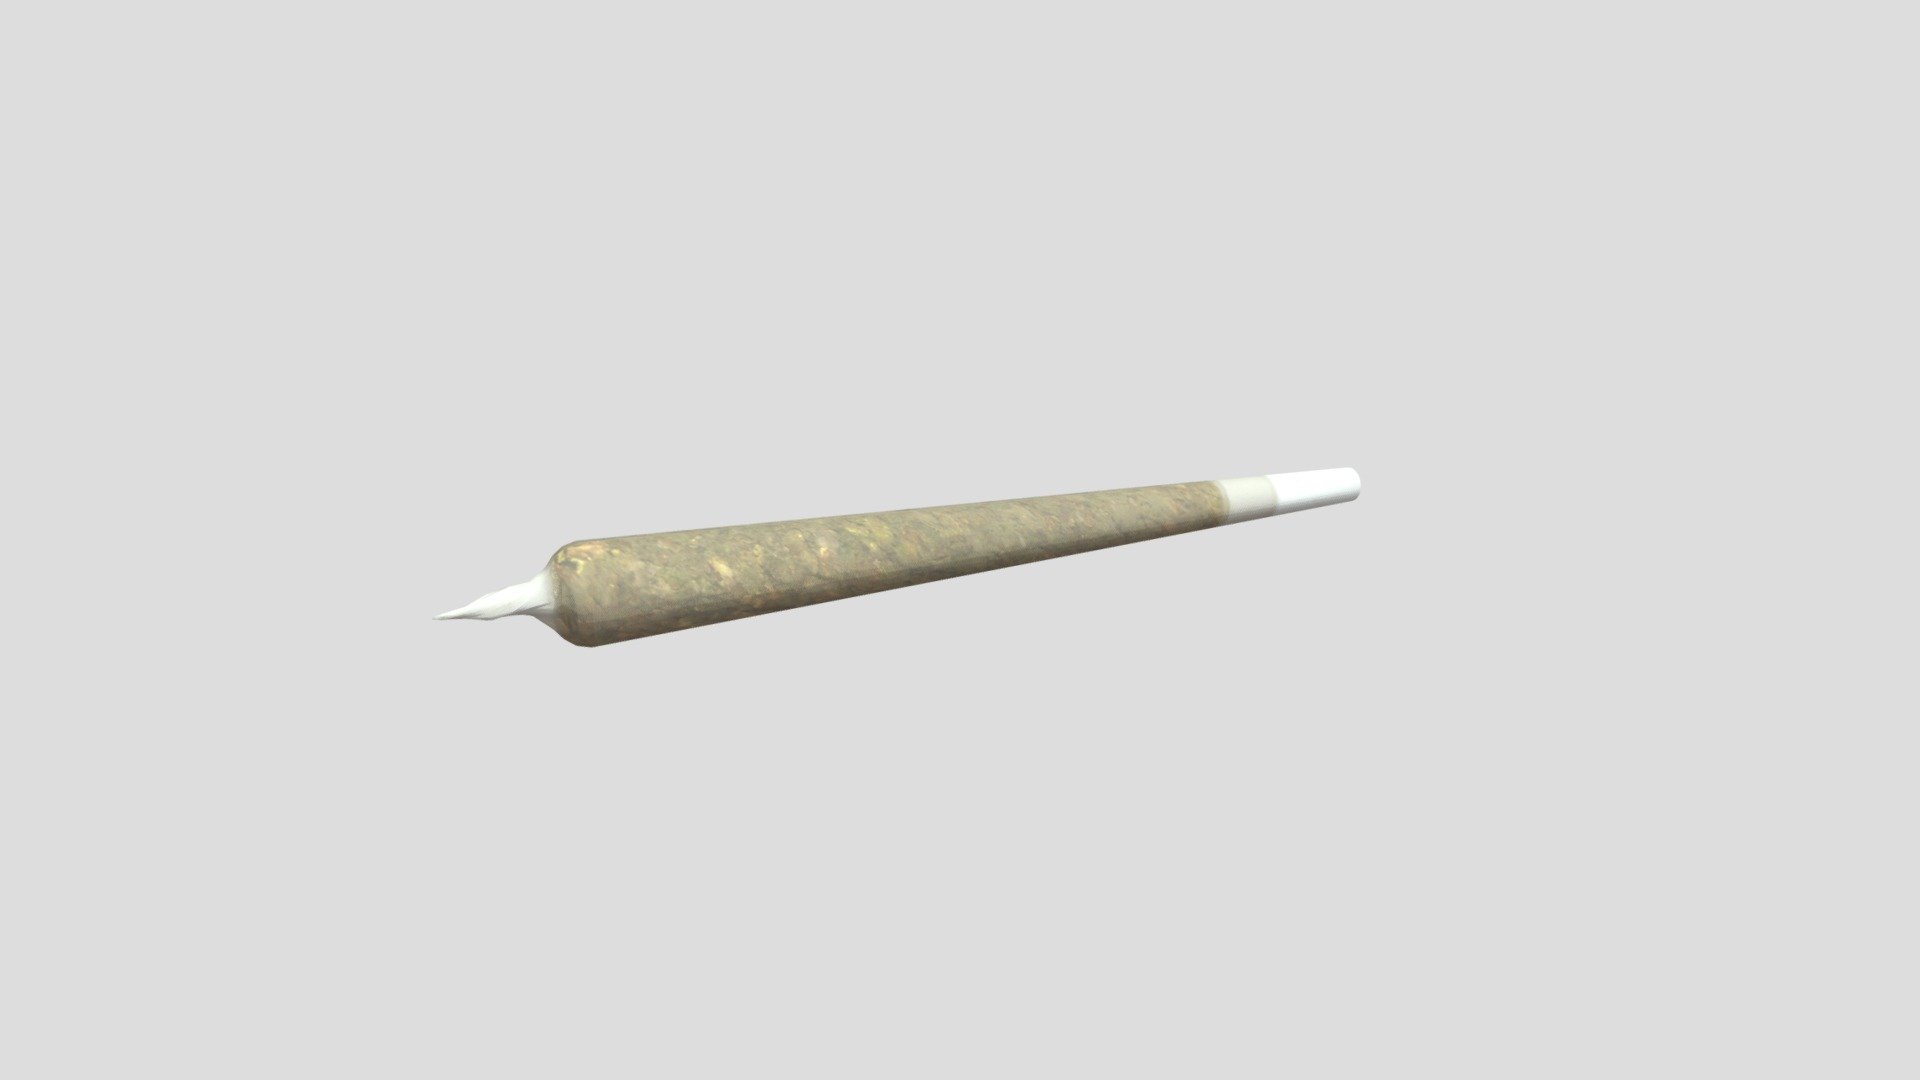 This Low Poly Joint comes with 4K Textures and 828 vertices making it perfect for low poly uses.

The Model has Vertex Colors and is UV Unwrapped for future texturing

This model is Blender Native

Looking for more ? Check out my other 3D Models ! - Joint 4K Low-poly 3D model - Buy Royalty Free 3D model by Desertsage 3d model